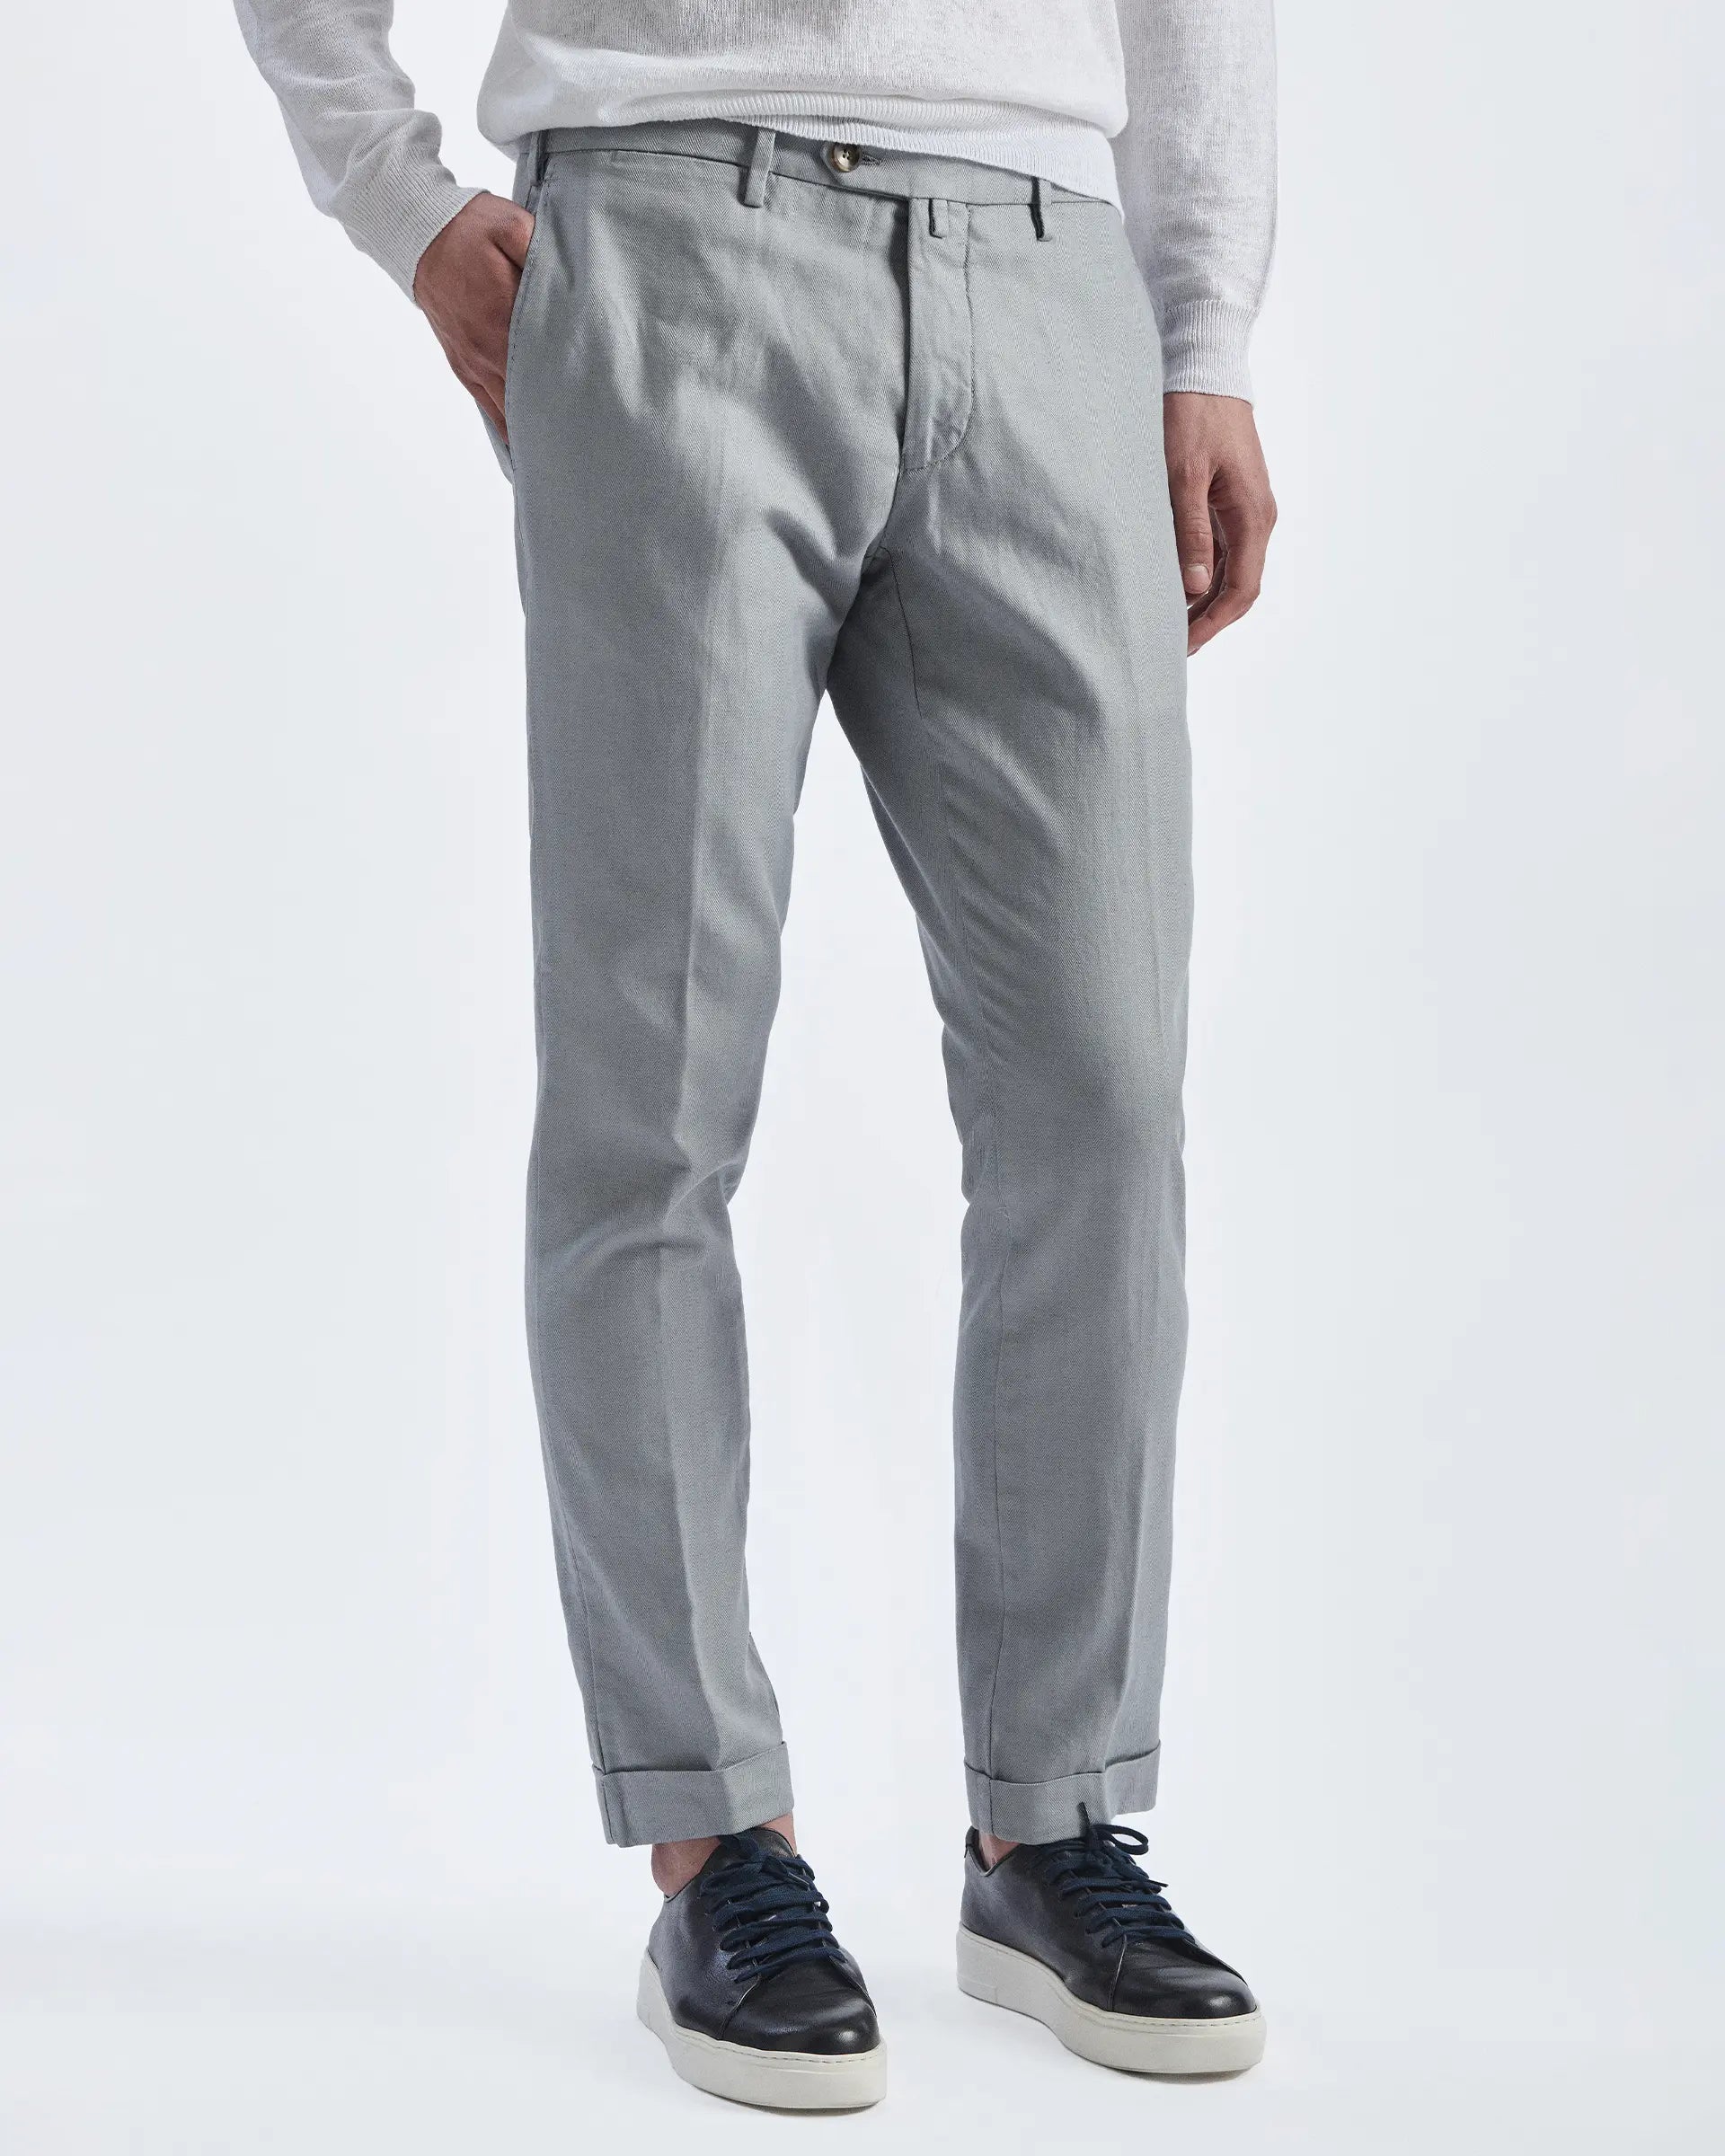 Grey Linen and Cotton Stretch Pants